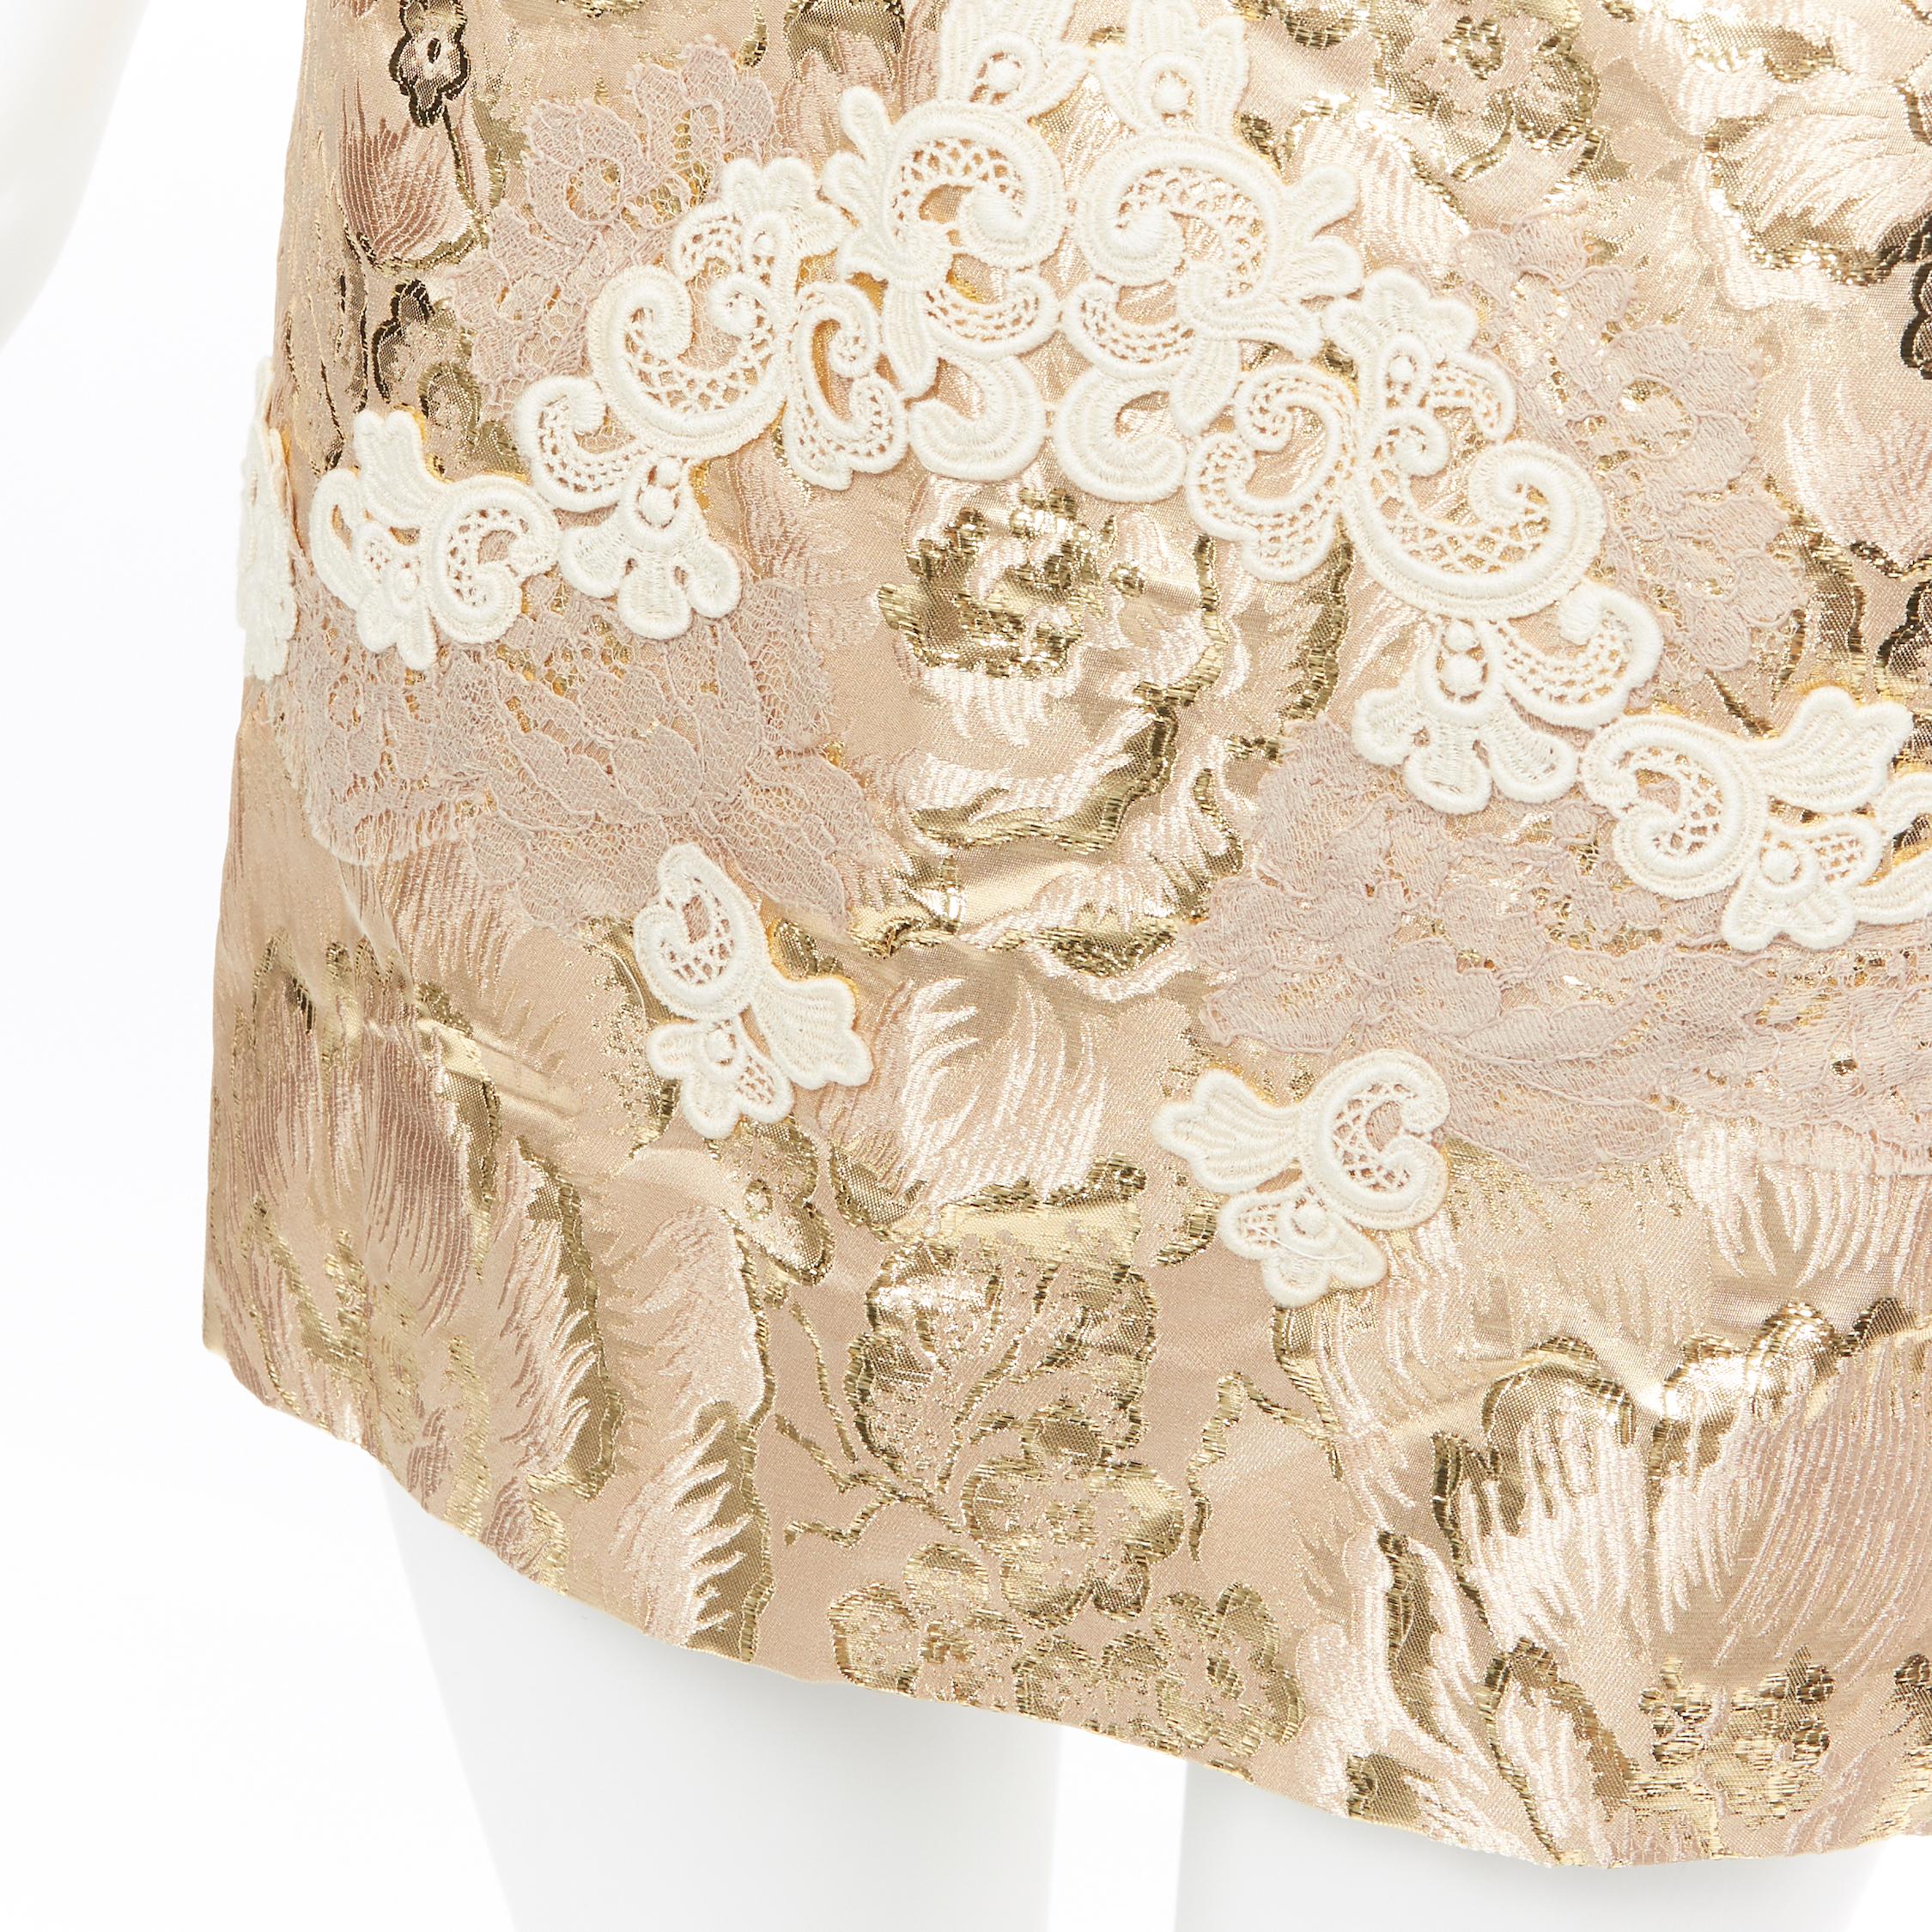 new DOLCE GABBANA metallic gold lace applique floral brocade fitted skirt IT36
Brand: Dolce Gabbana
Designer: Dolce Gabbana
Model Name / Style: Brocade skirt
Material: Polyester, silk
Color: Gold
Pattern: Floral
Closure: Zip
Lining material: